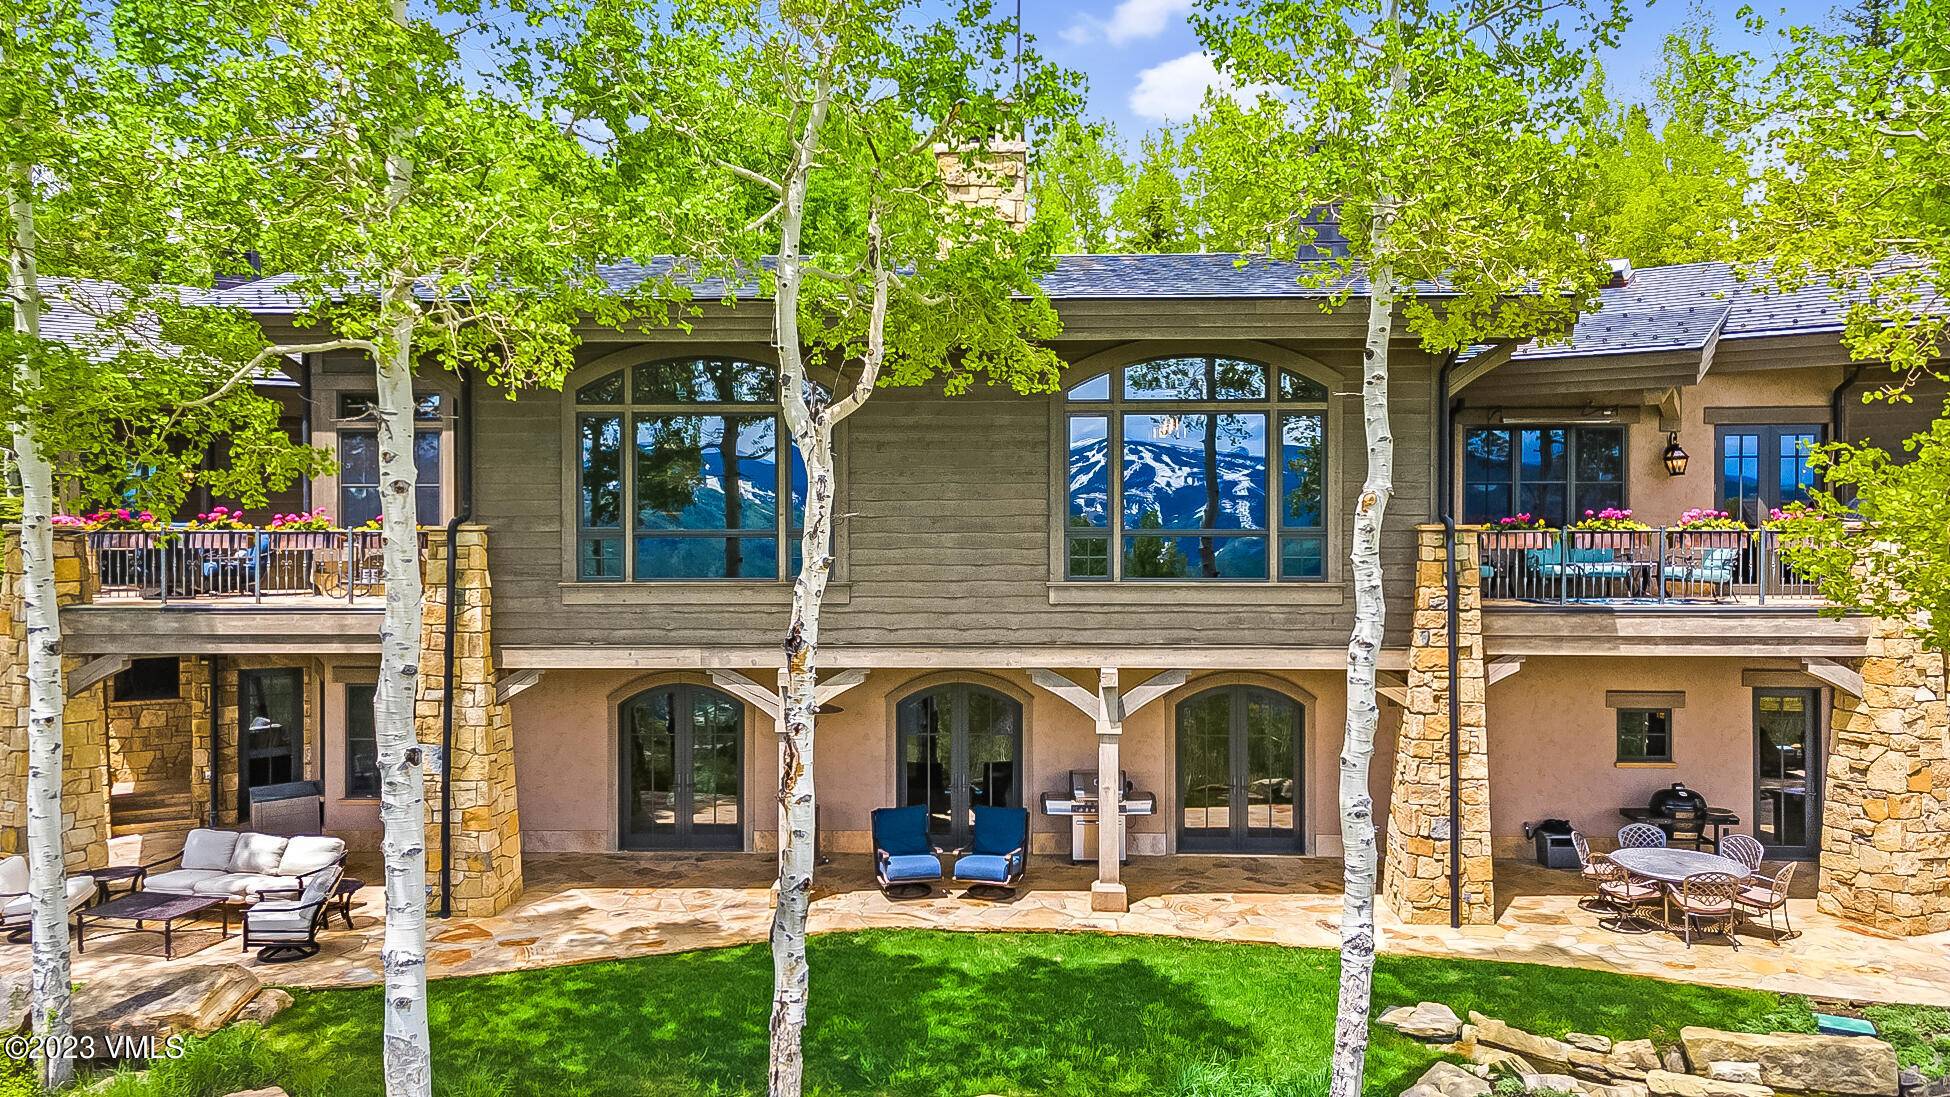 Introducing the Mountain Star Masterpiece at 46 Jasmine Nestled in the prestigious and exclusive gated community of Mountain Star, this architectural gem redefines private luxury living.